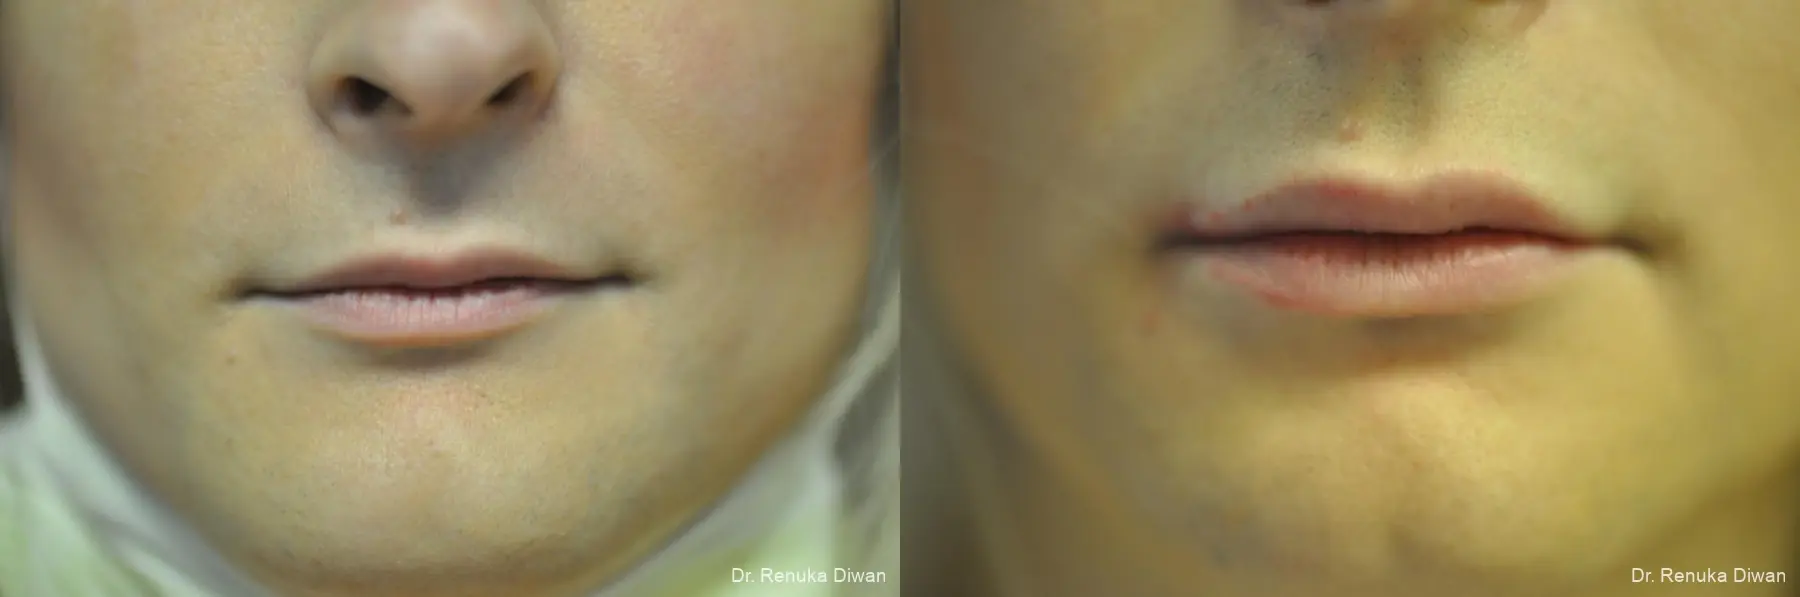 Lip Augmentation: Patient 18 - Before and After 1